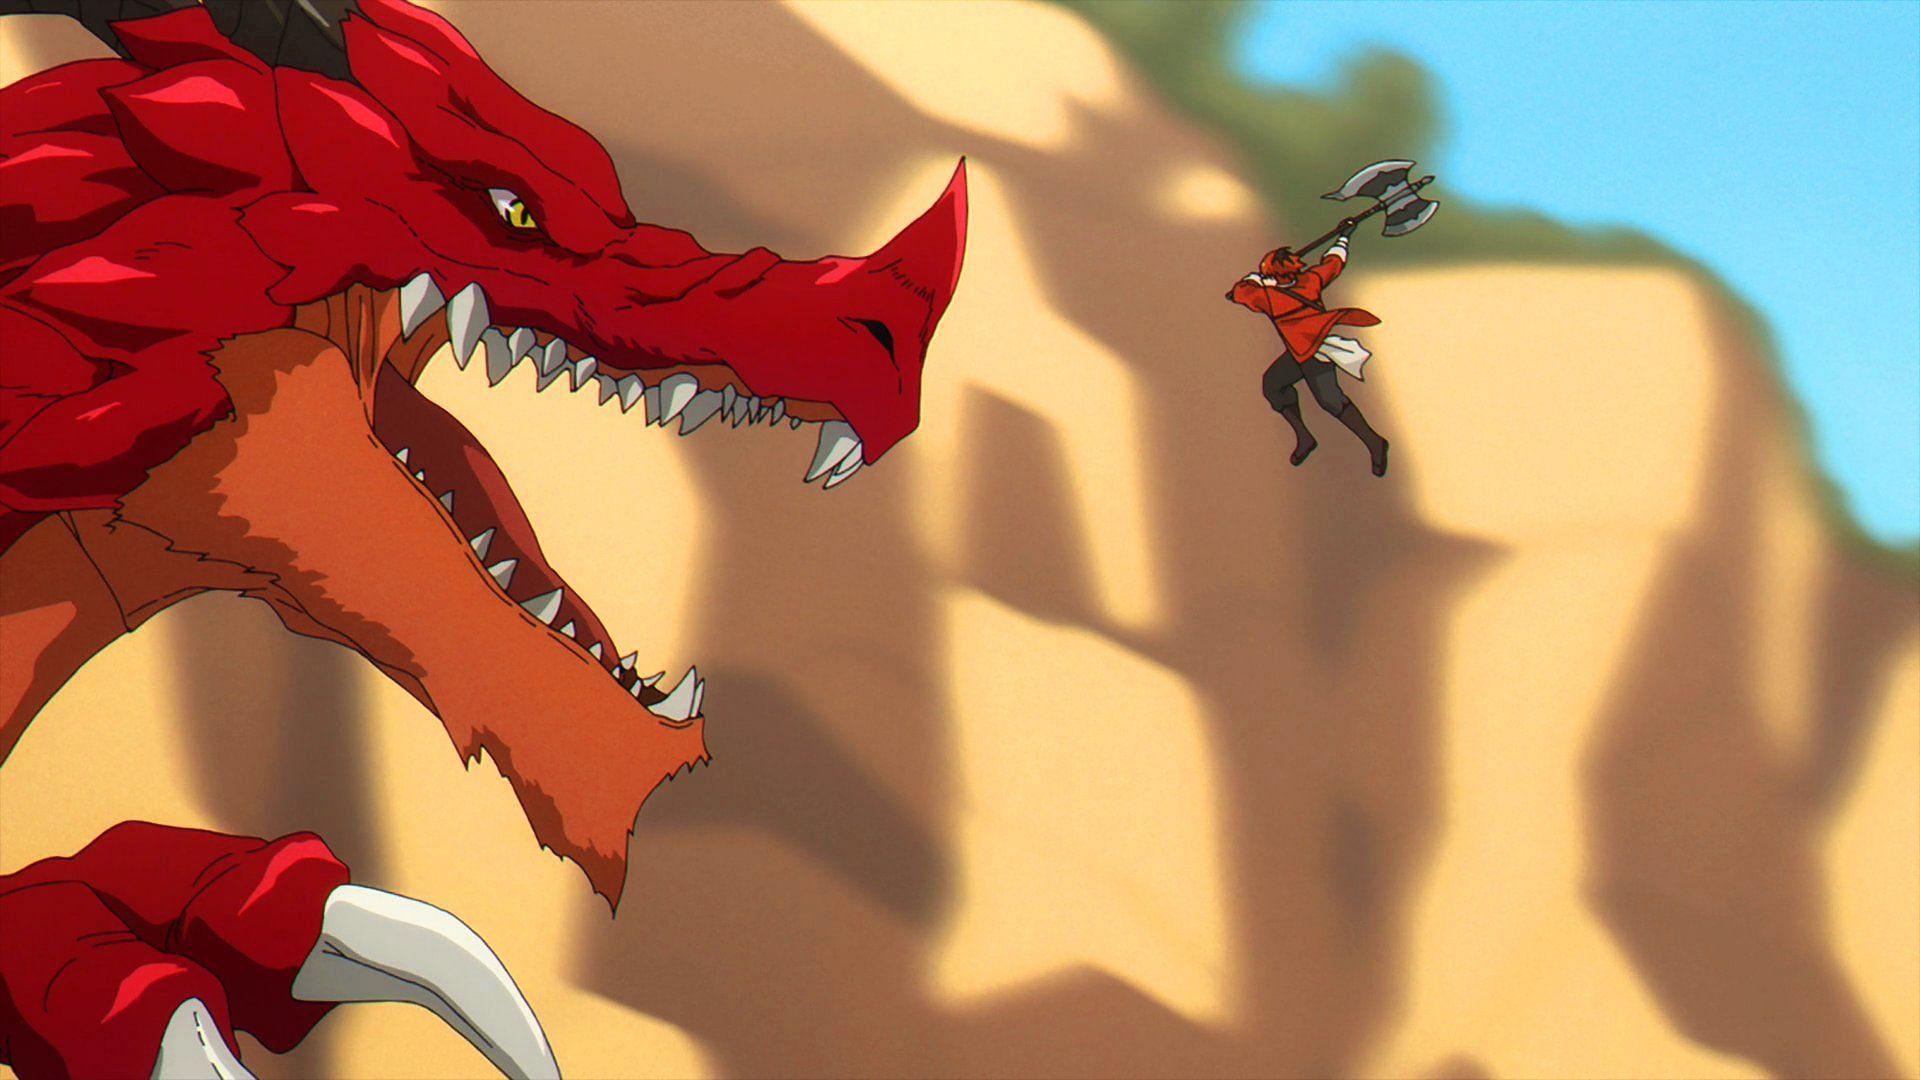 Stark defeats the dragon in Frieren anime episode 6 (Image via Madhouse)